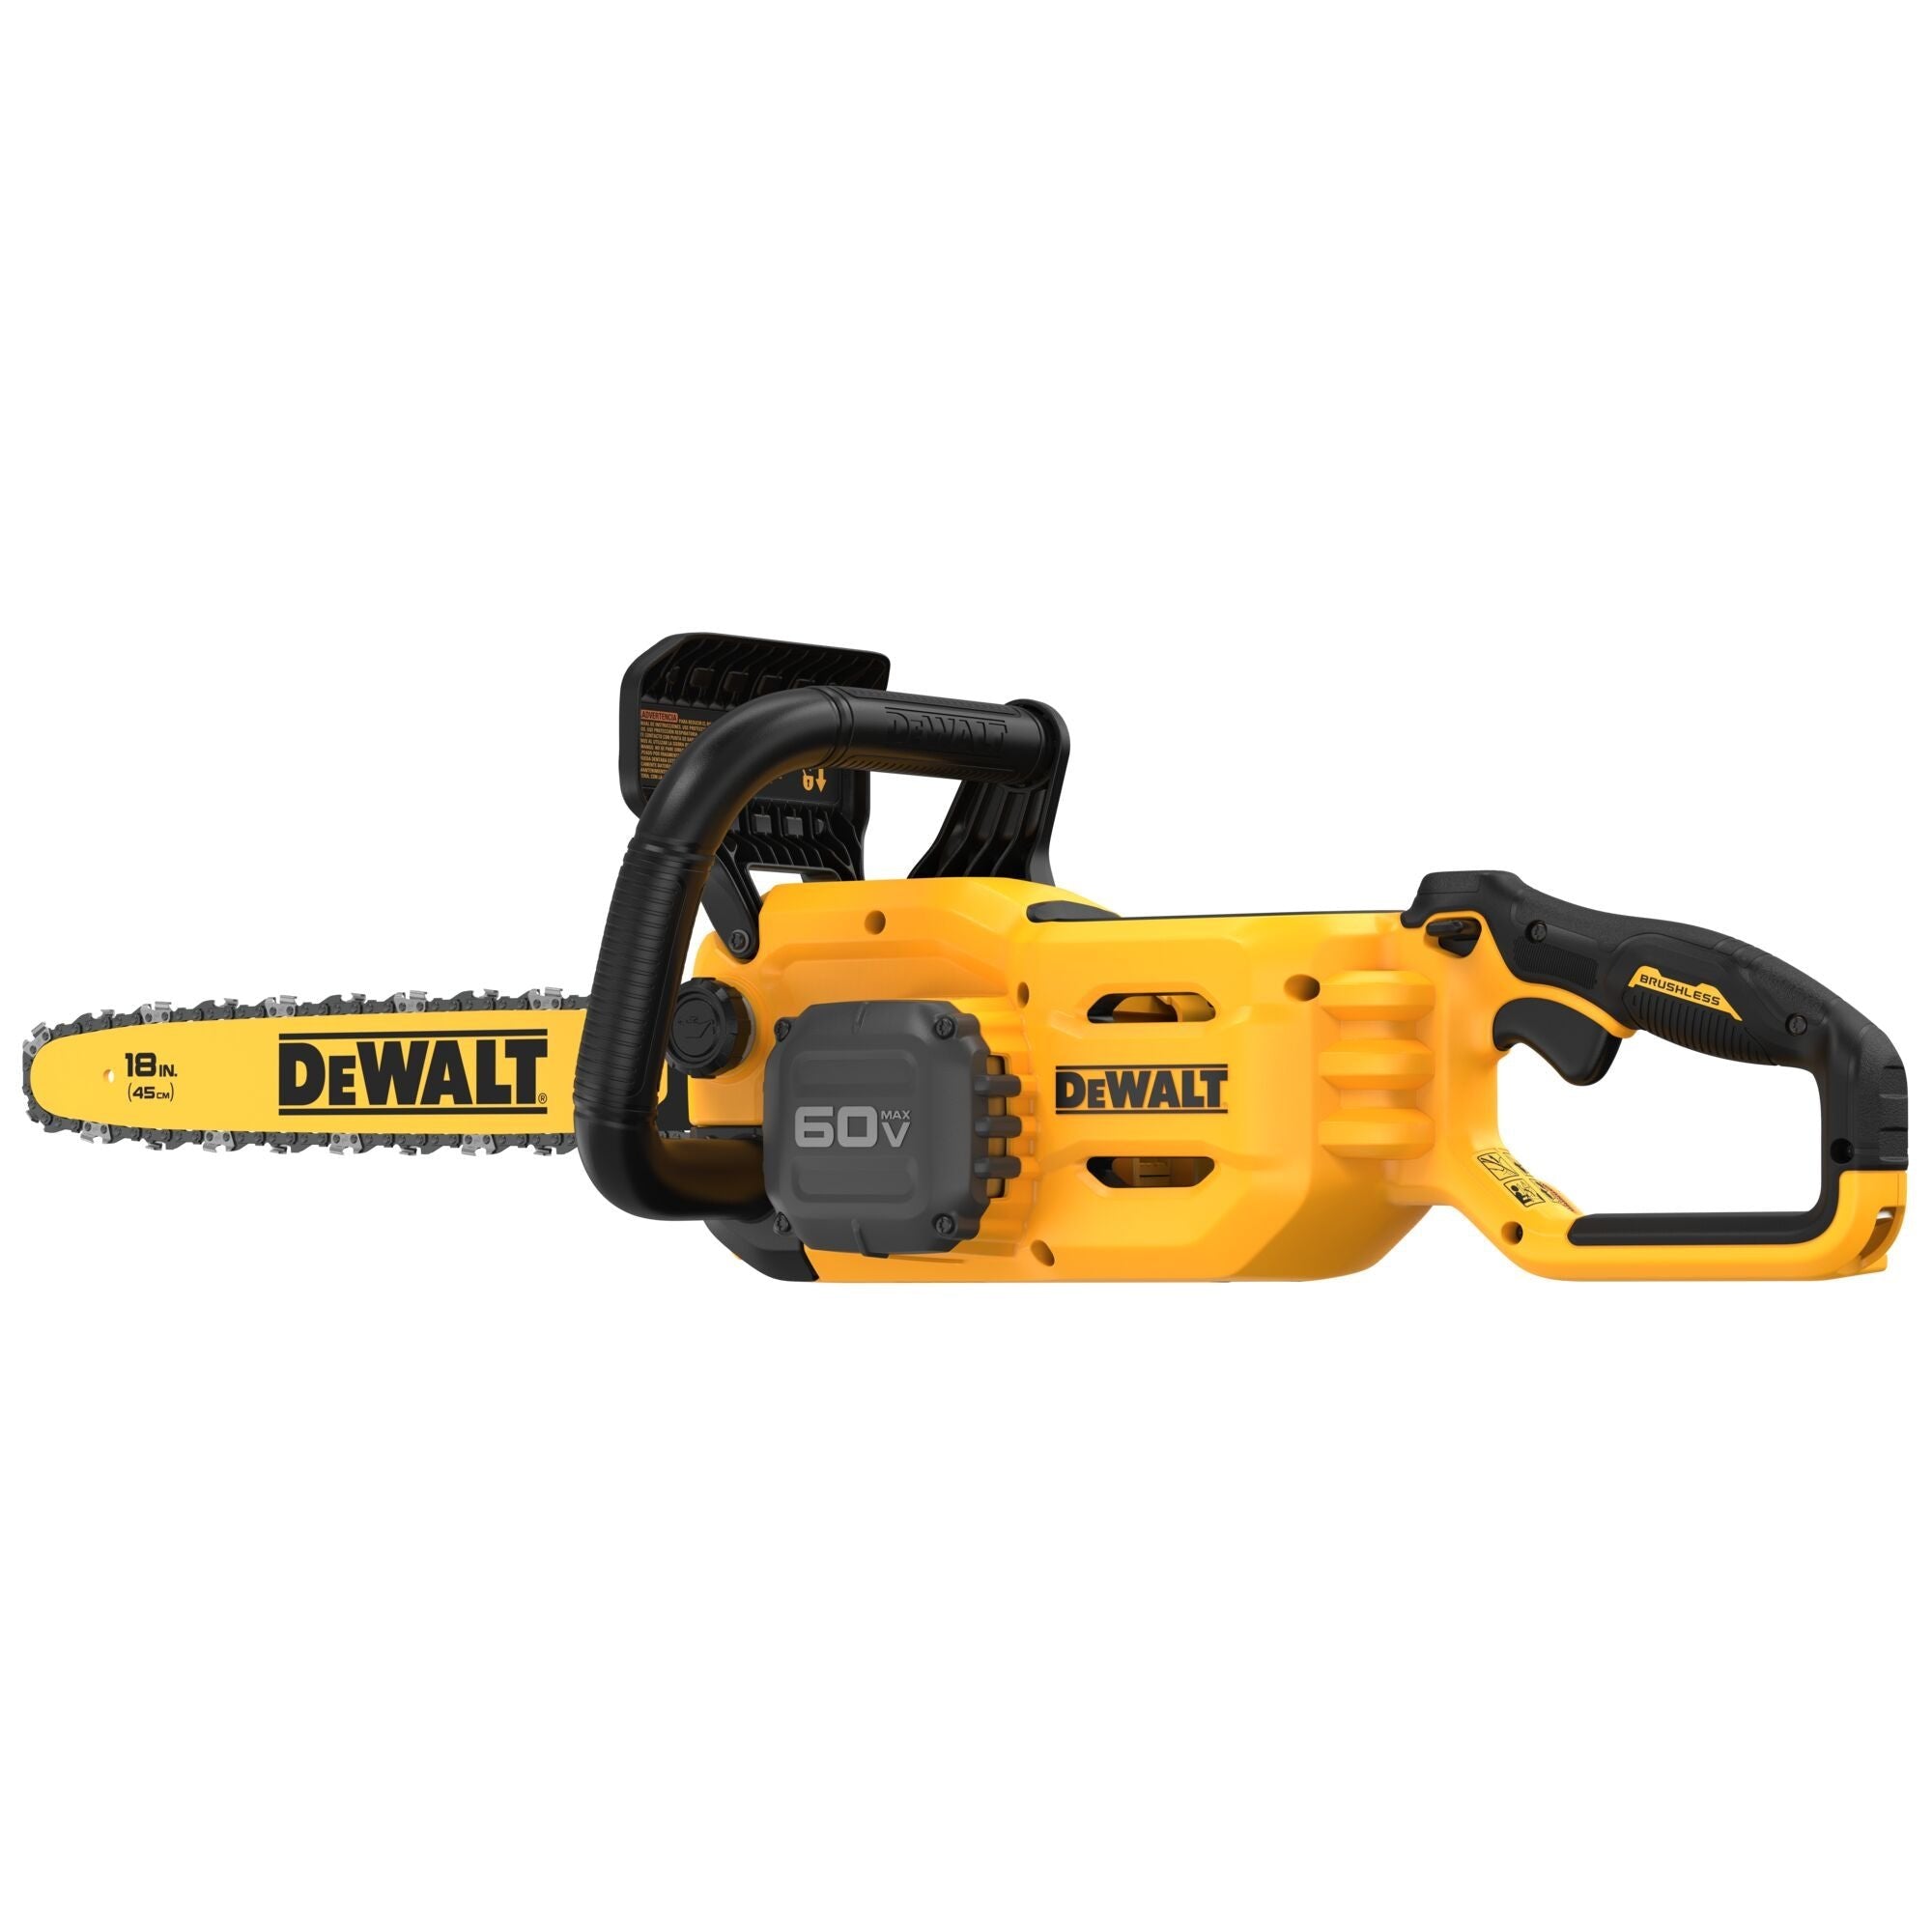 DEWALT DCCS672B 60V MAX* Brushless Cordless 18 in. Chainsaw (Tool Only)